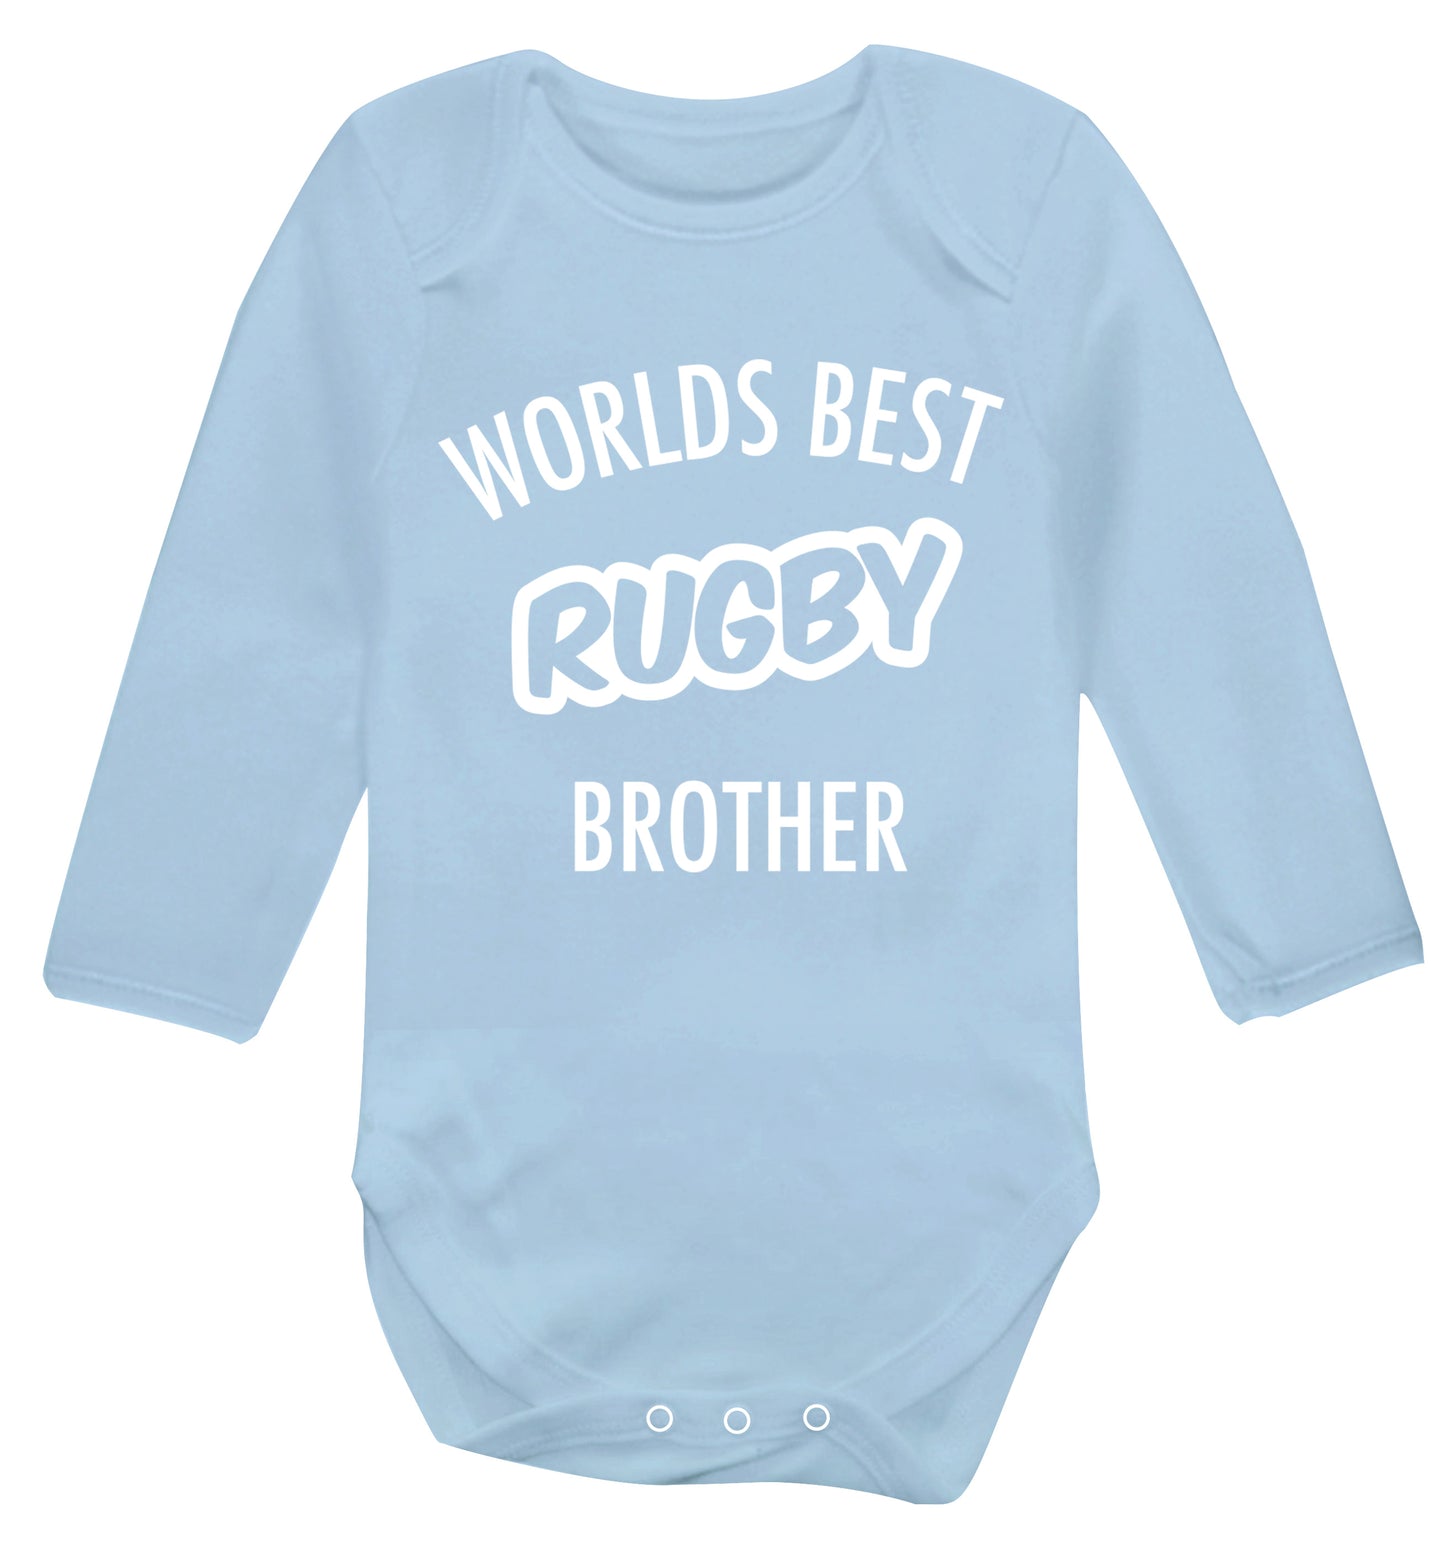 Worlds best rugby brother Baby Vest long sleeved pale blue 6-12 months